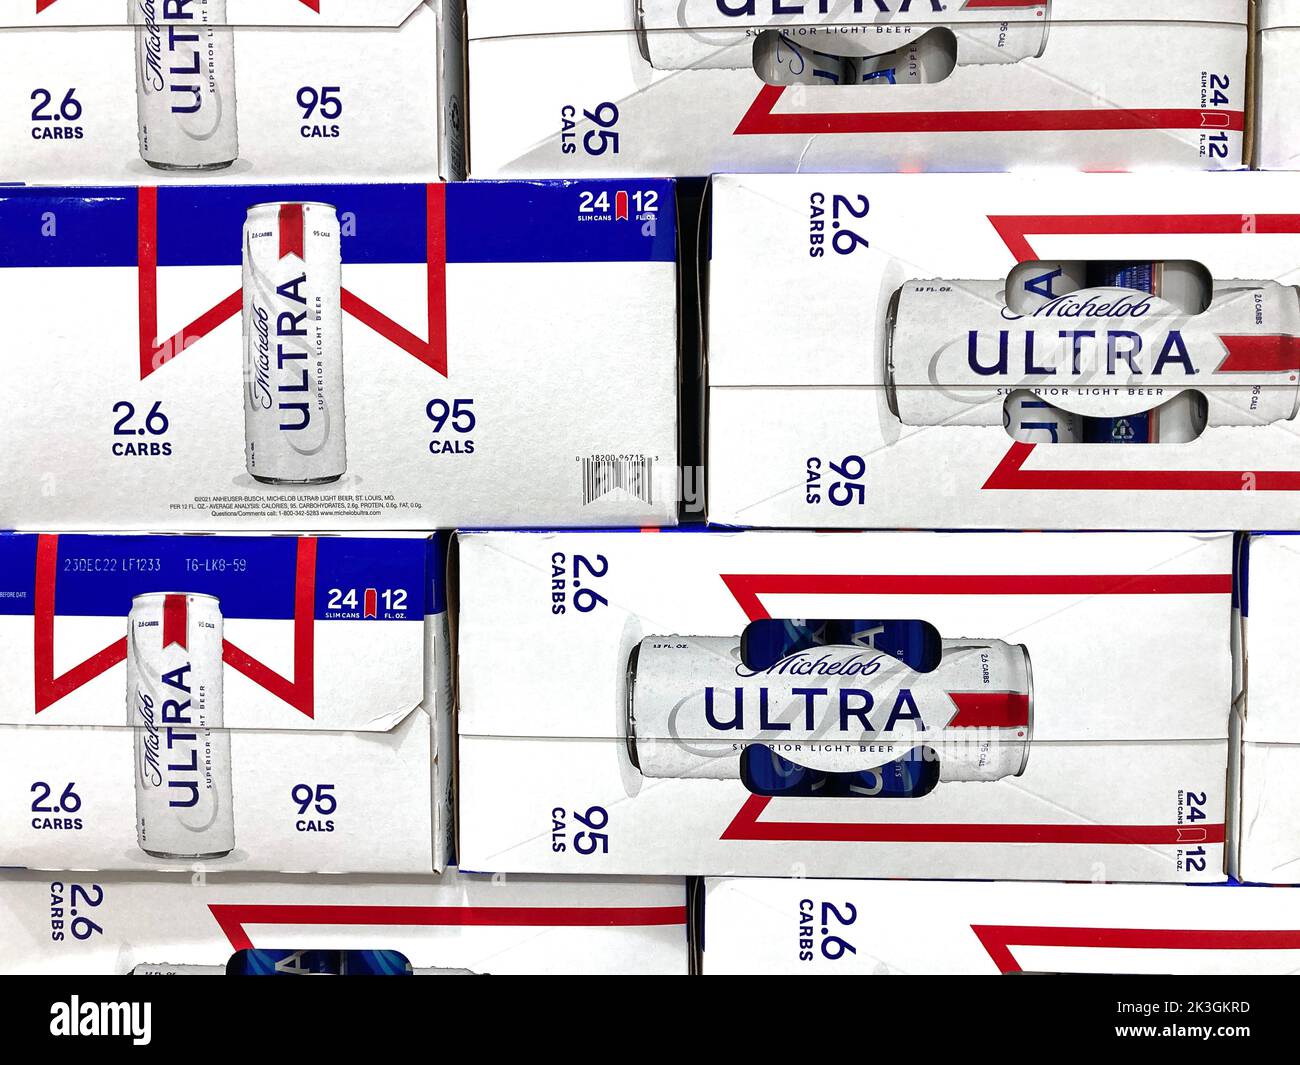 Michelob ULTRA, Superior Light Beer 24 pack beer slim cans display at grocery store - San Jose, California, USA - 2022 Stock Photo